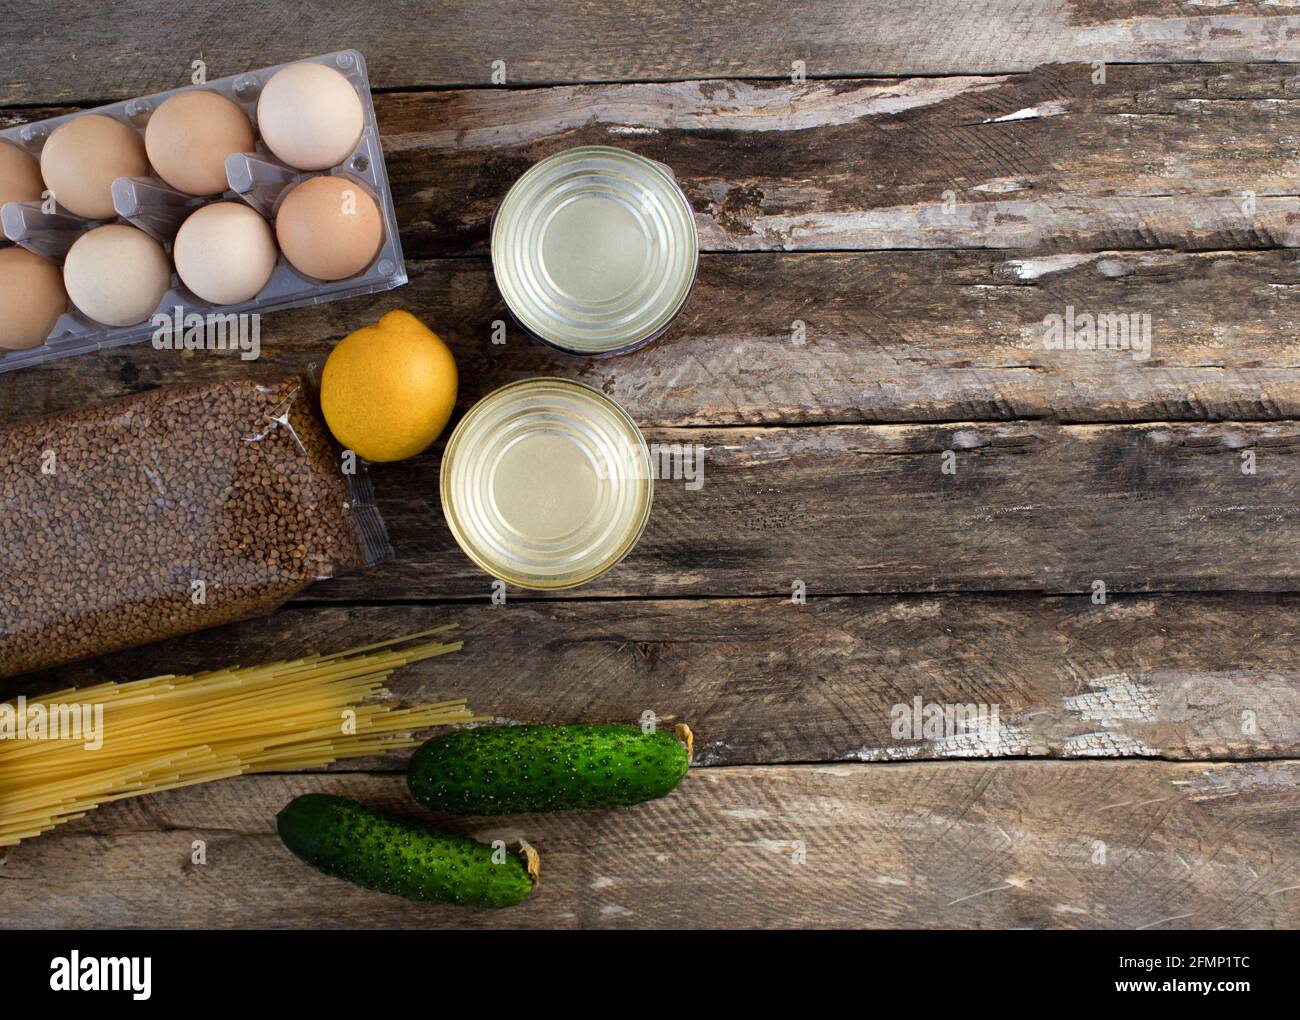 Food supplies. Buying food on a wooden background. Eggs, canned food, pasta, vegetables on a wooden background Stock Photo